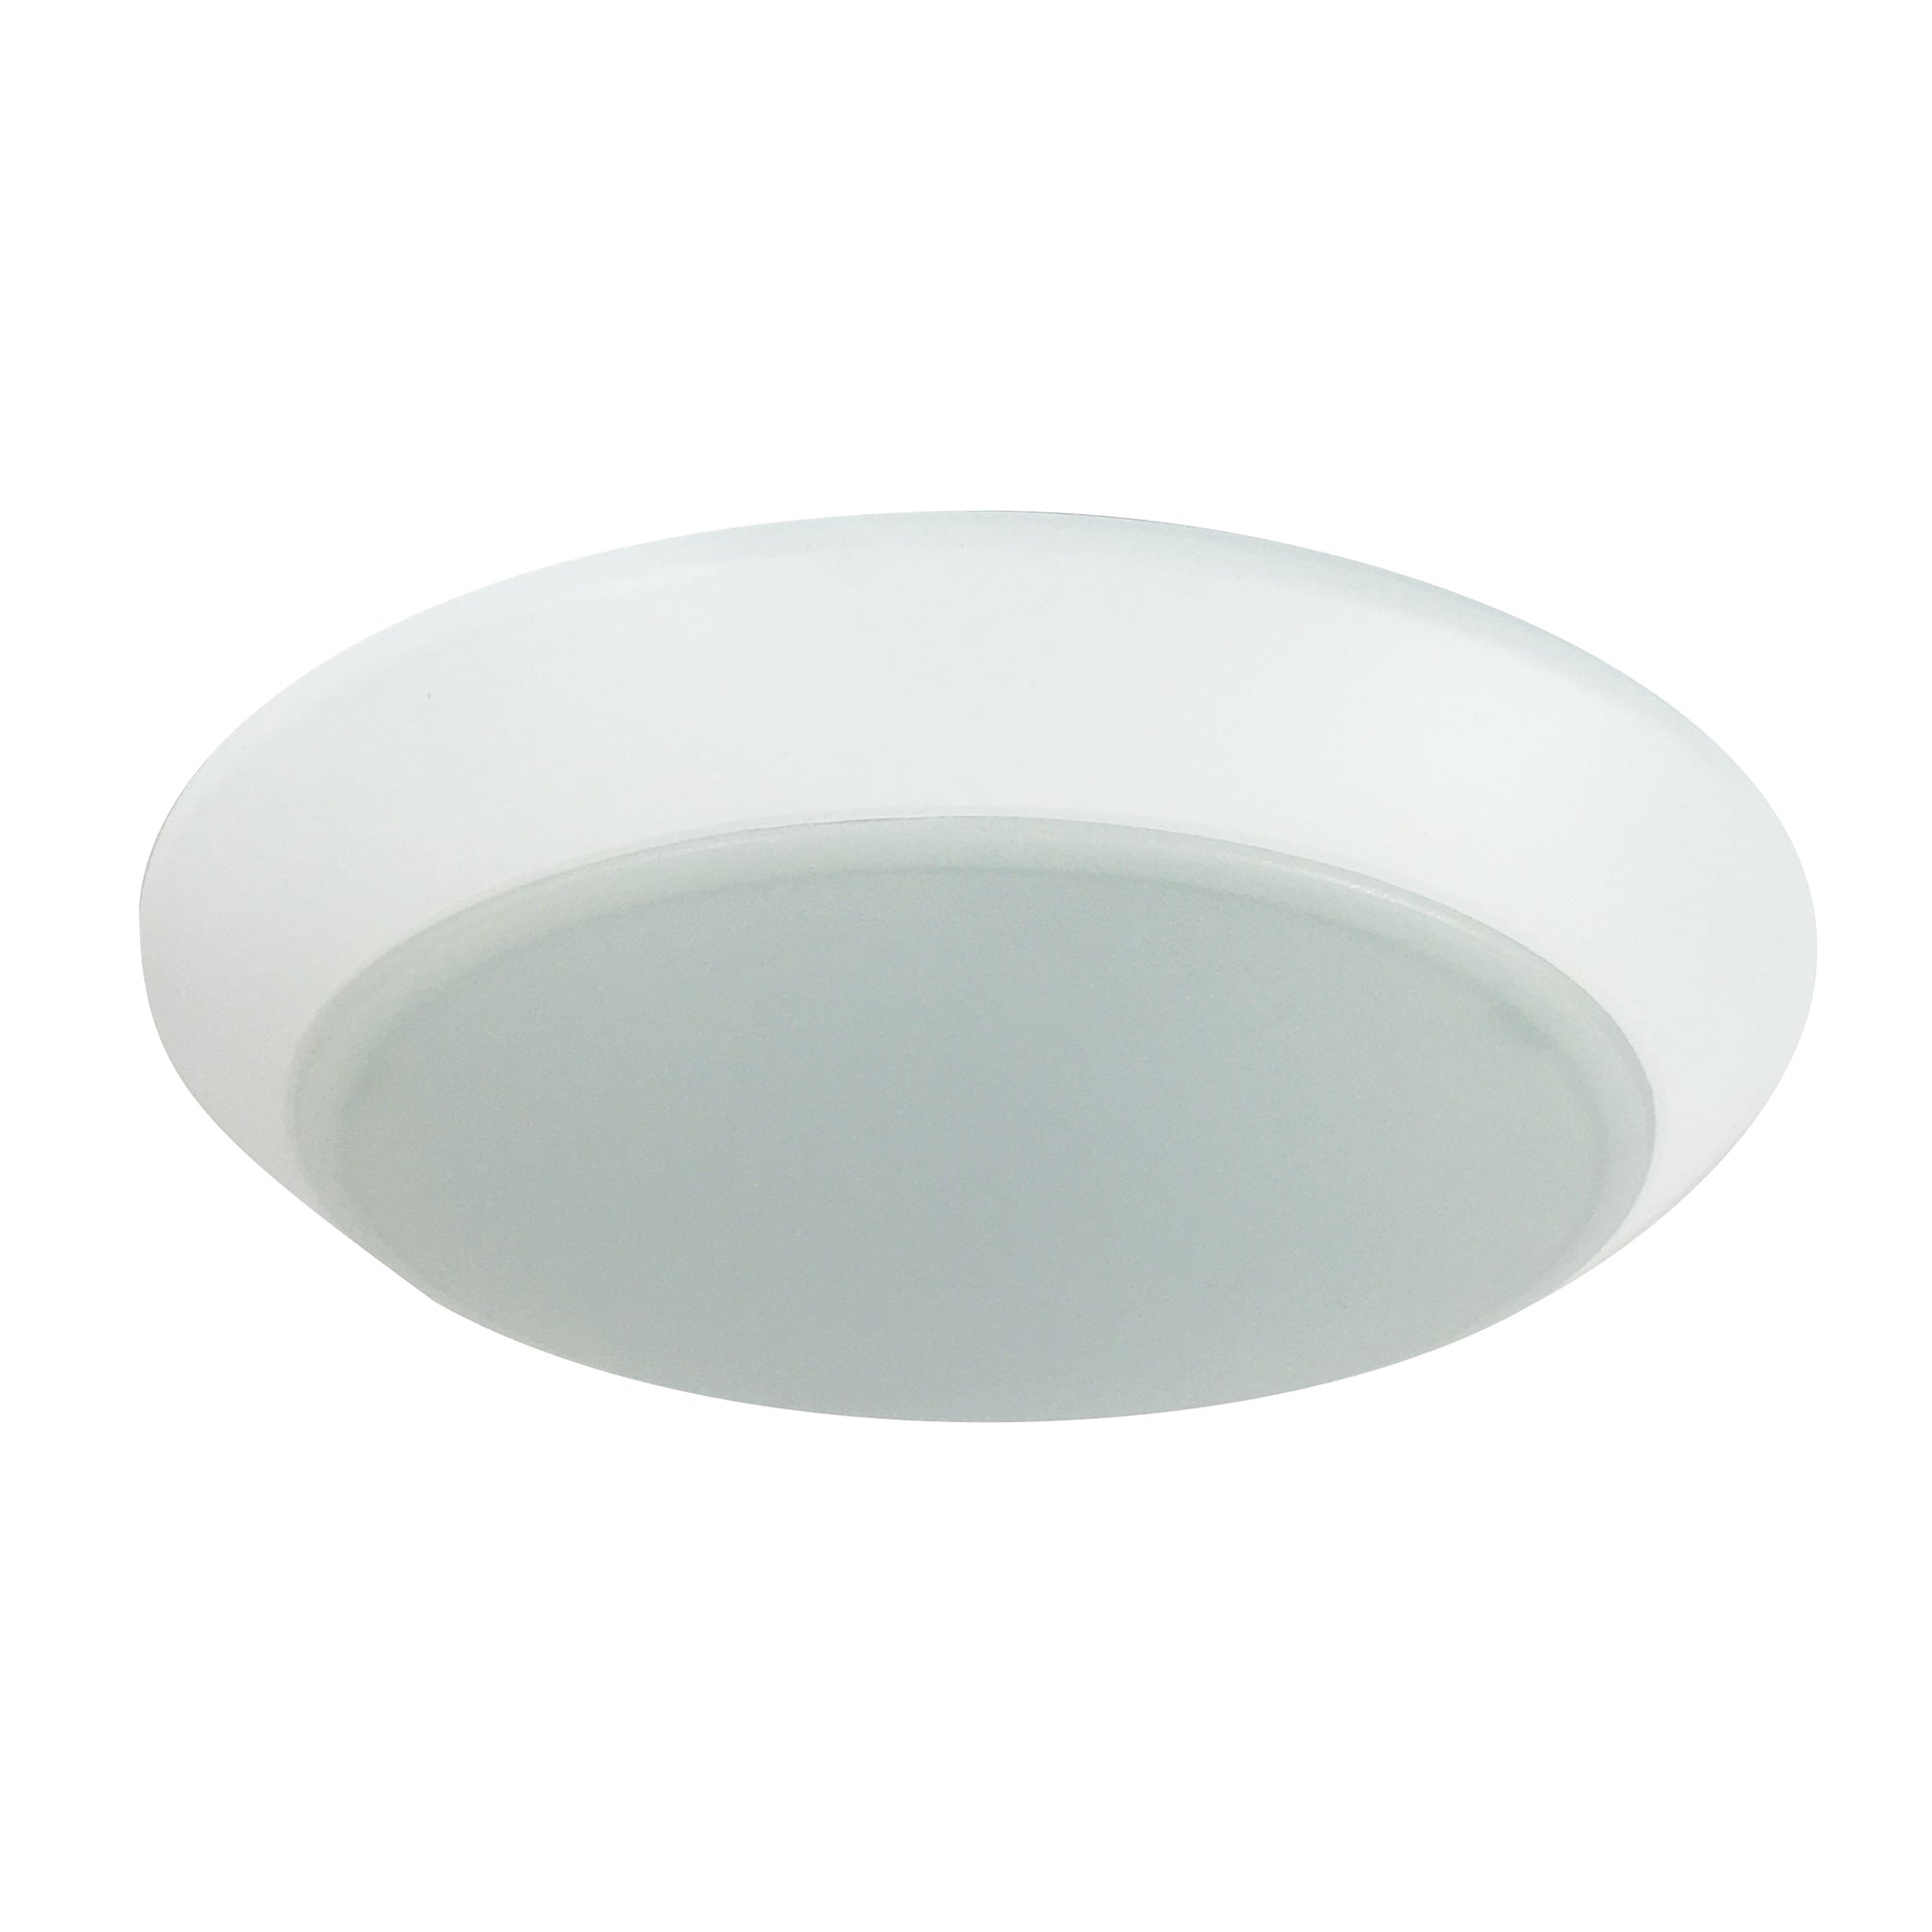 Nora Lighting NLOPAC-R8T2430W - Surface - 8 Inch AC Opal LED Surface Mount, 2150lm / 32W, 3000K, White finish